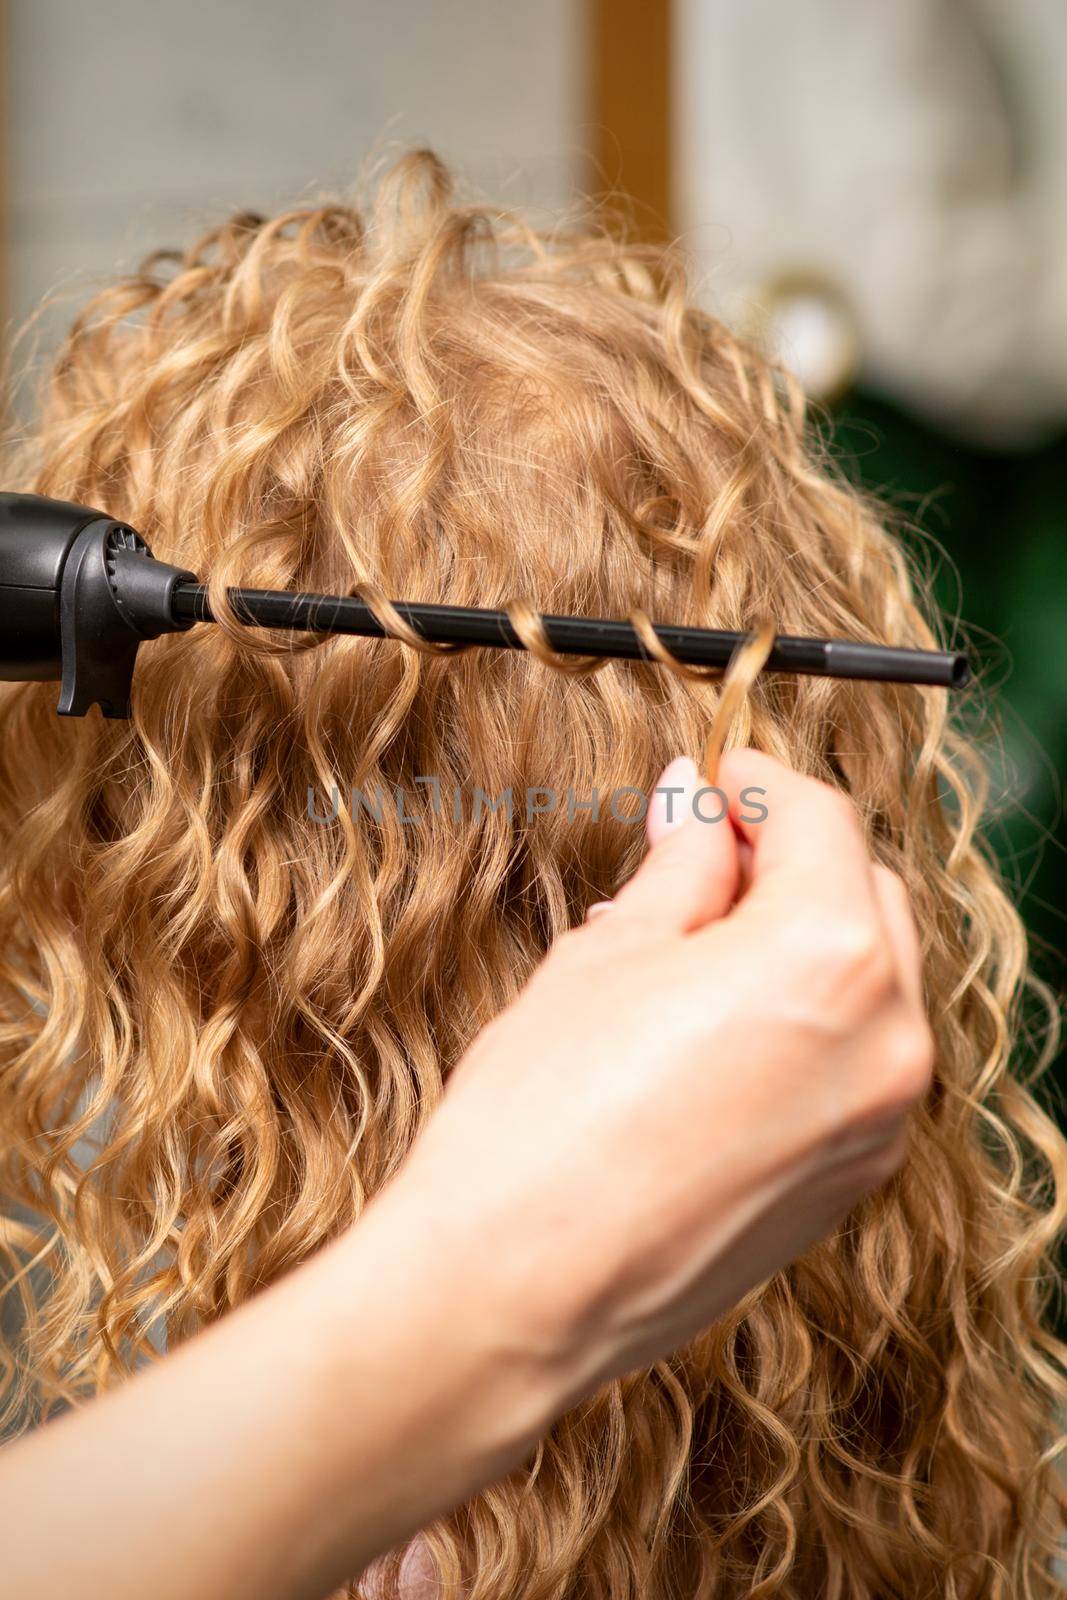 Hands of hairstylist curl wavy hair of young woman using a curling iron for hair curls in the beauty salon rear view